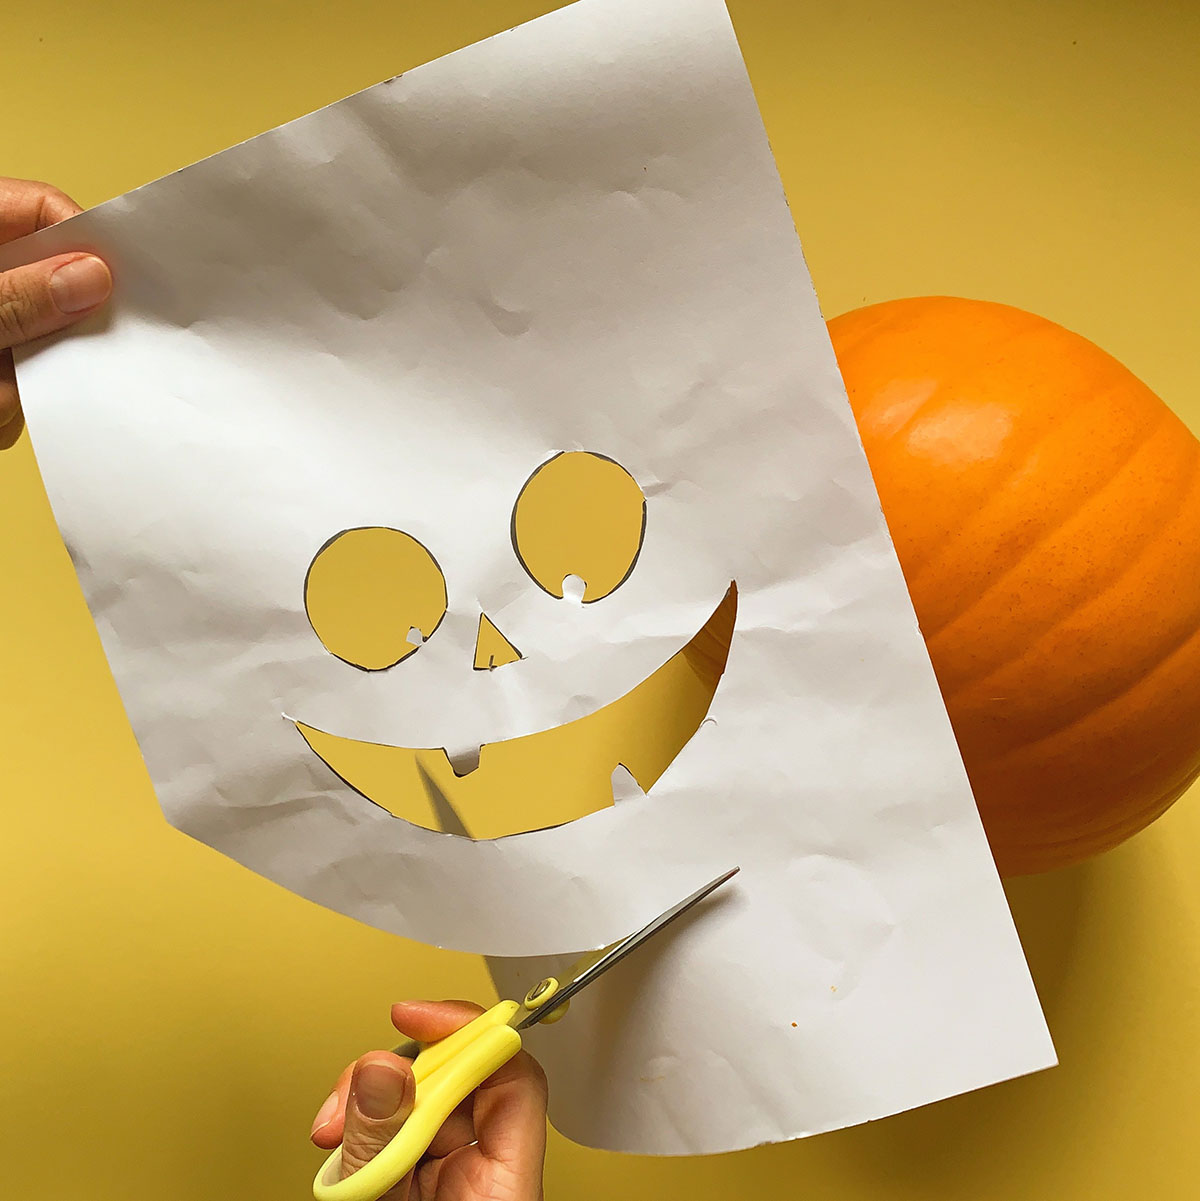 A photo of a pair of hands cutting out a pumpkin face stencil from paper with a pair of scissors and a pumpkin in the background